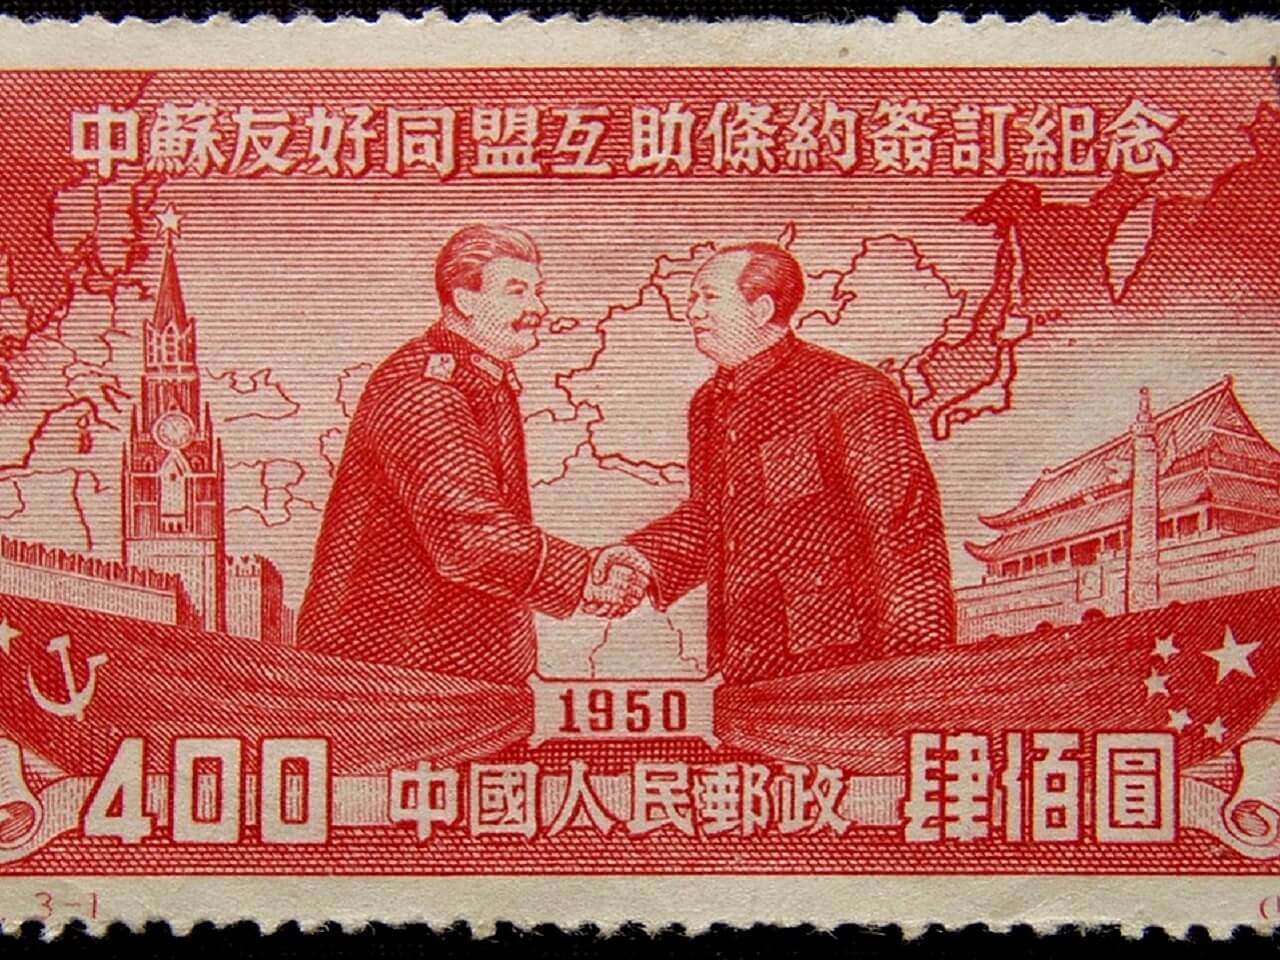 commie stamp dictatorships